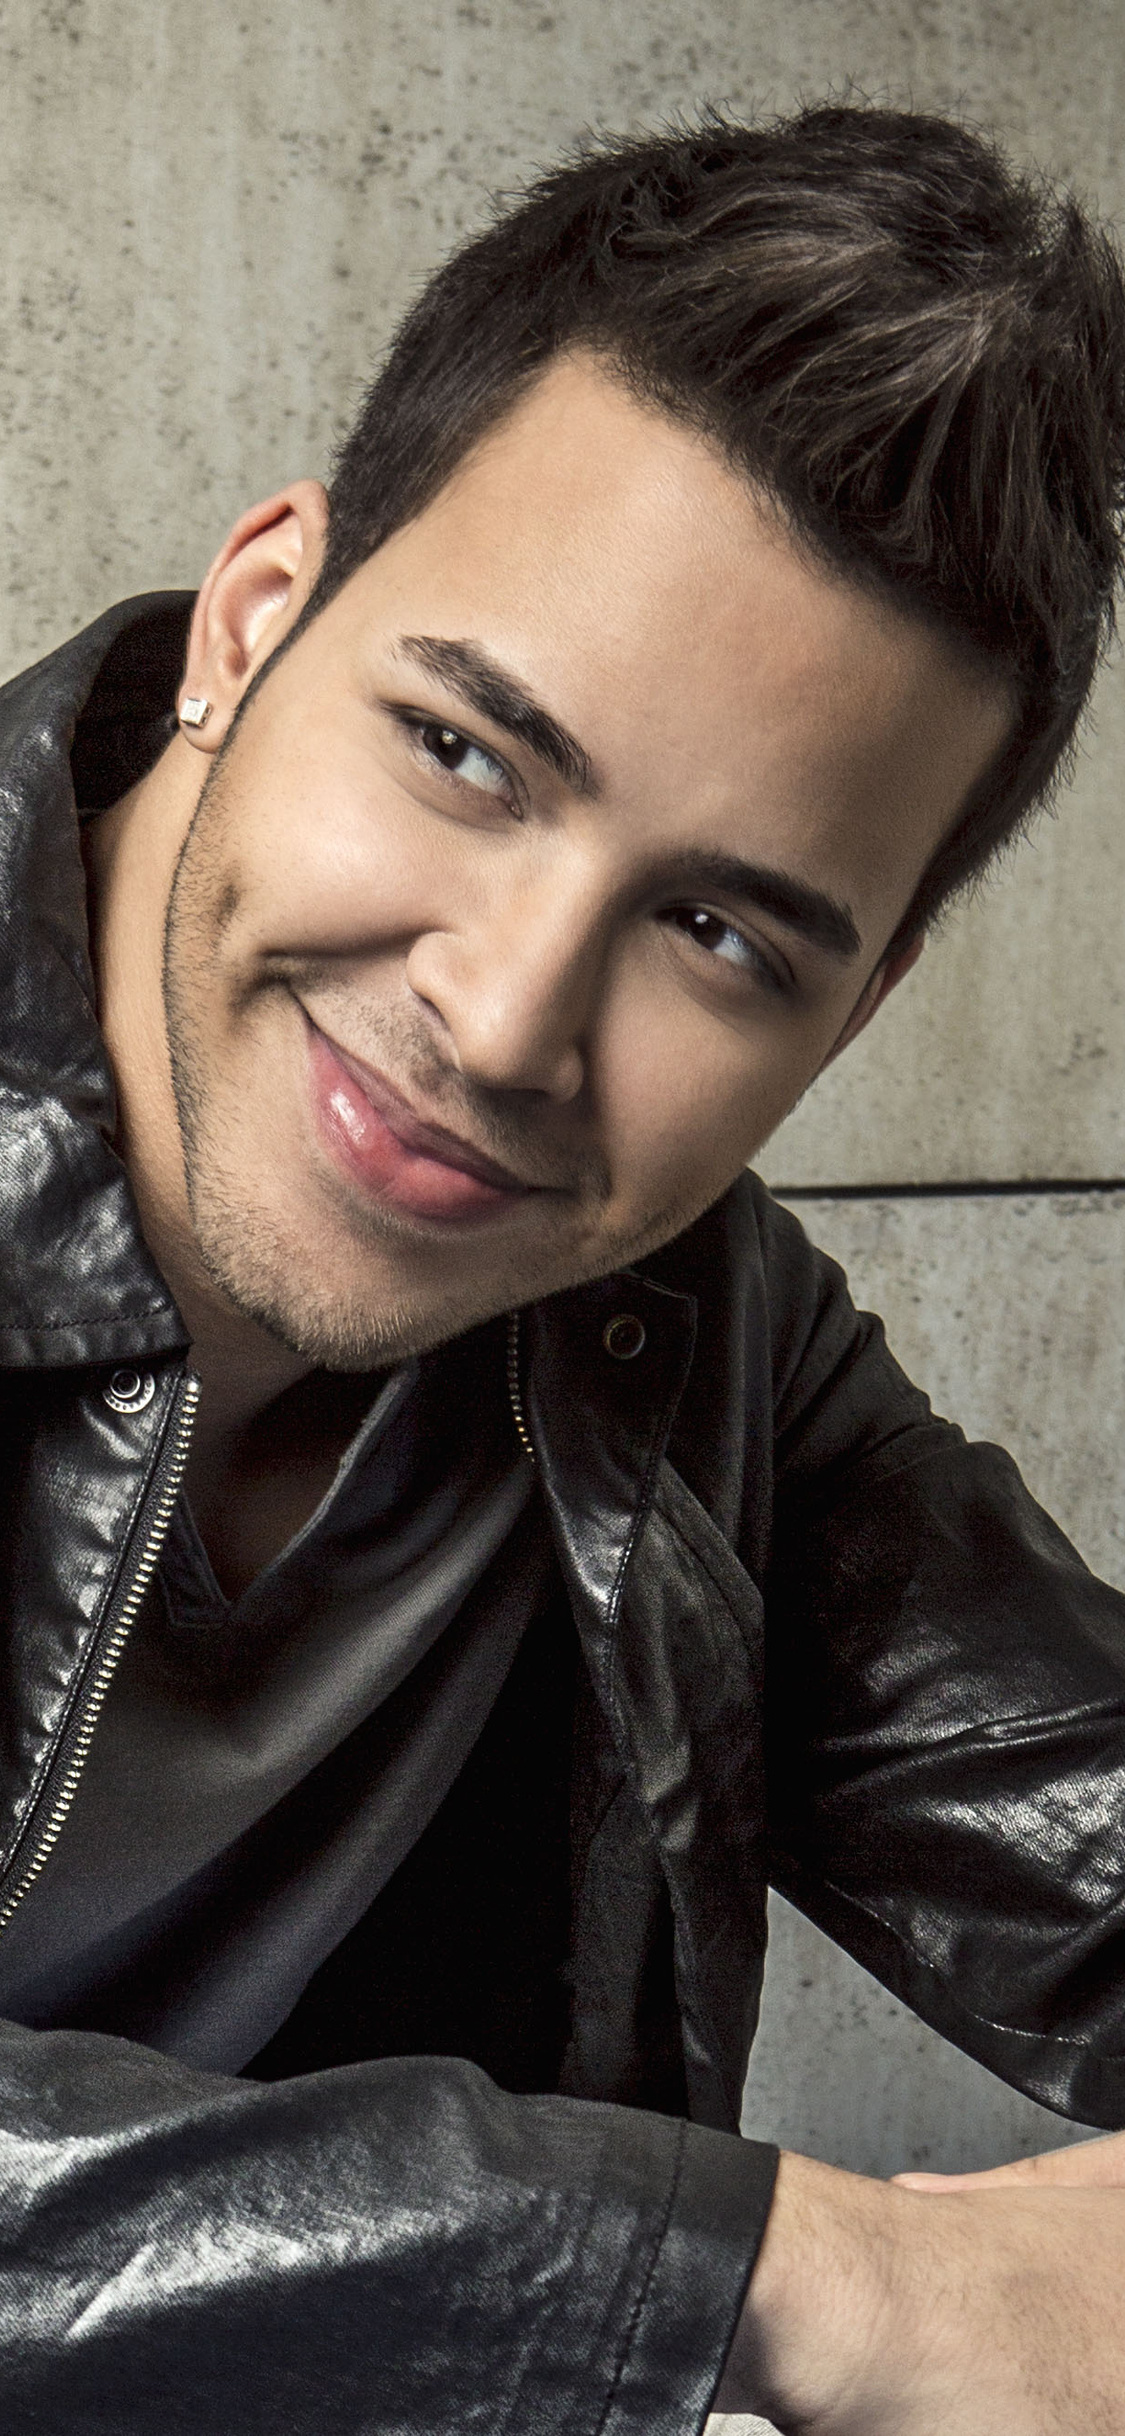 Prince Royce, iPhone wallpaper, HD 4K images, Music icon, 1130x2440 HD Handy